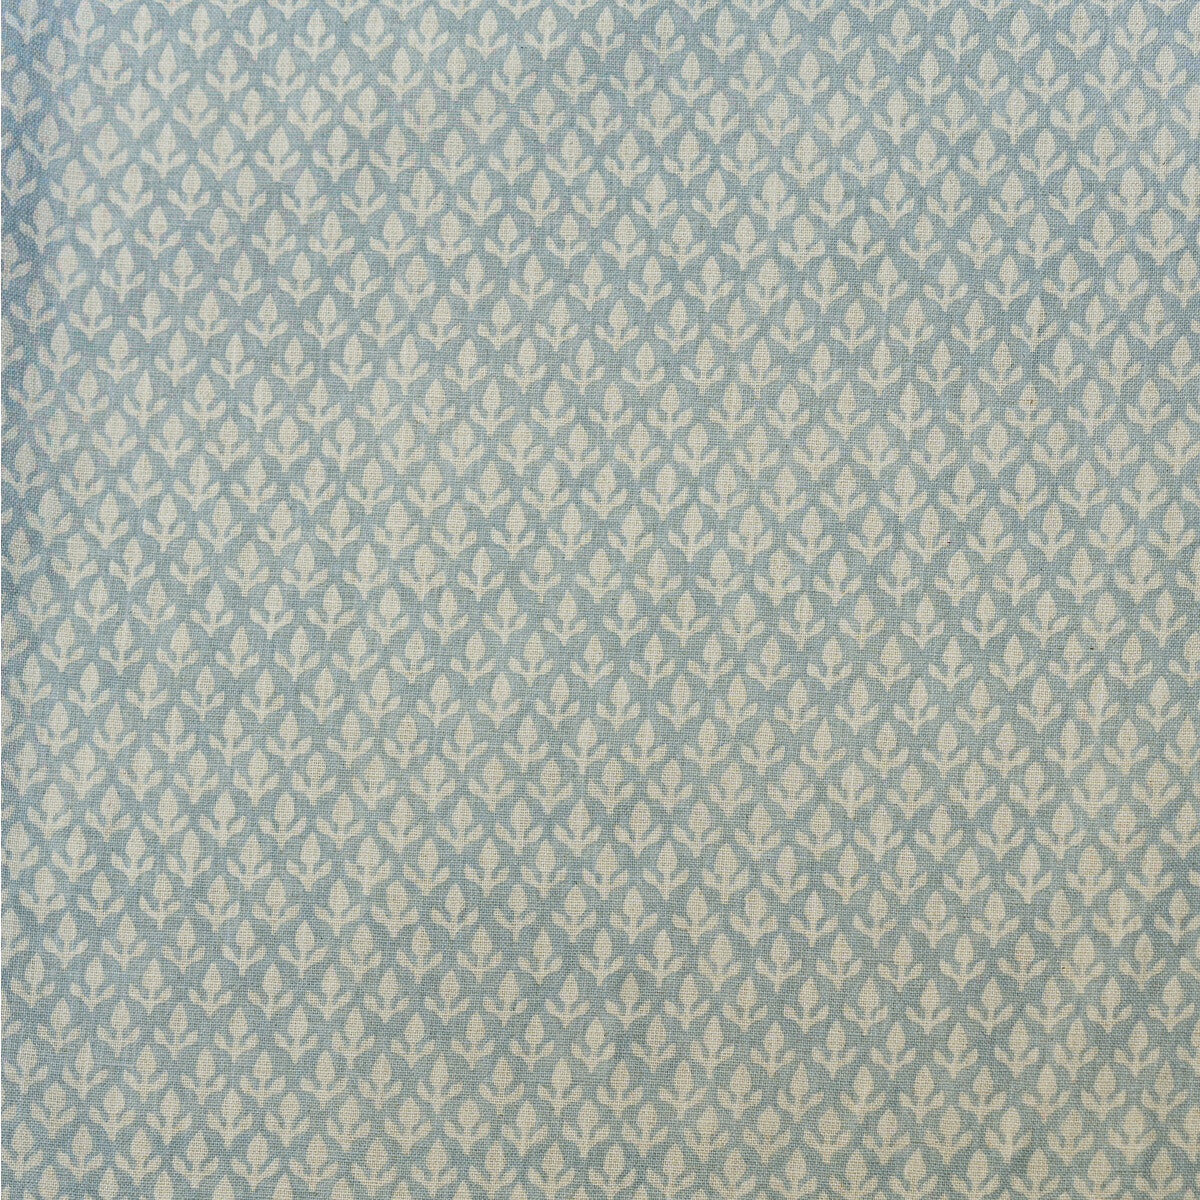 Bud fabric in sky color - pattern AM100379.15.0 - by Kravet Couture in the Andrew Martin Garden Path collection